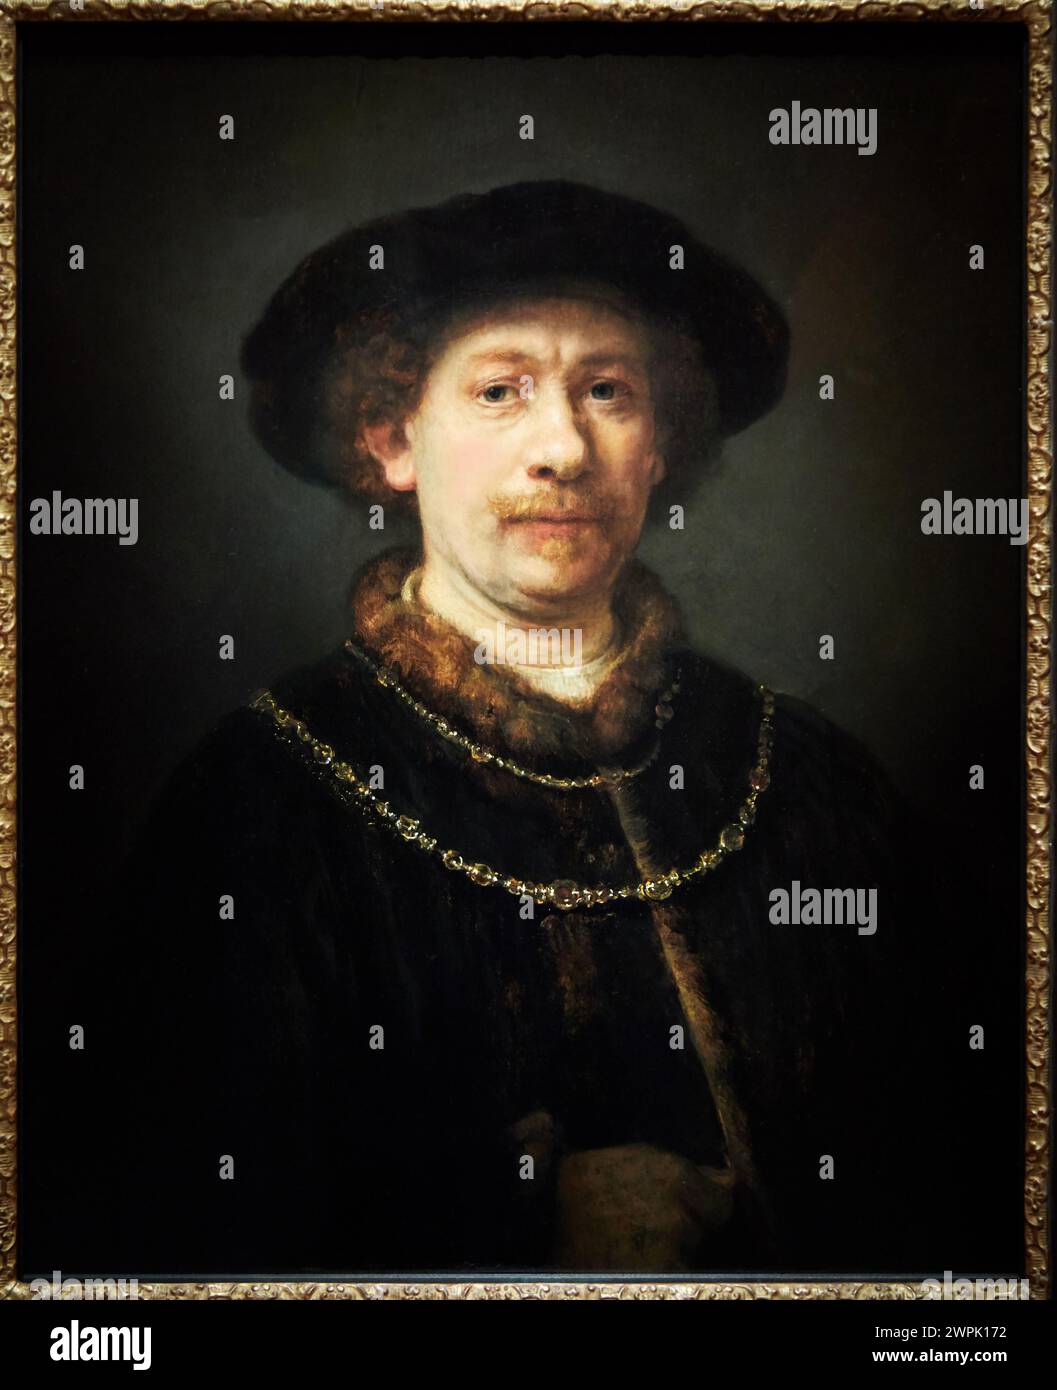 'Self-Portrait wearing a Hat and Two Chains', 1642-1643, Rembrandt, Thyssen Bornemisza Museum, Madrid, Spain, Europe Stock Photo